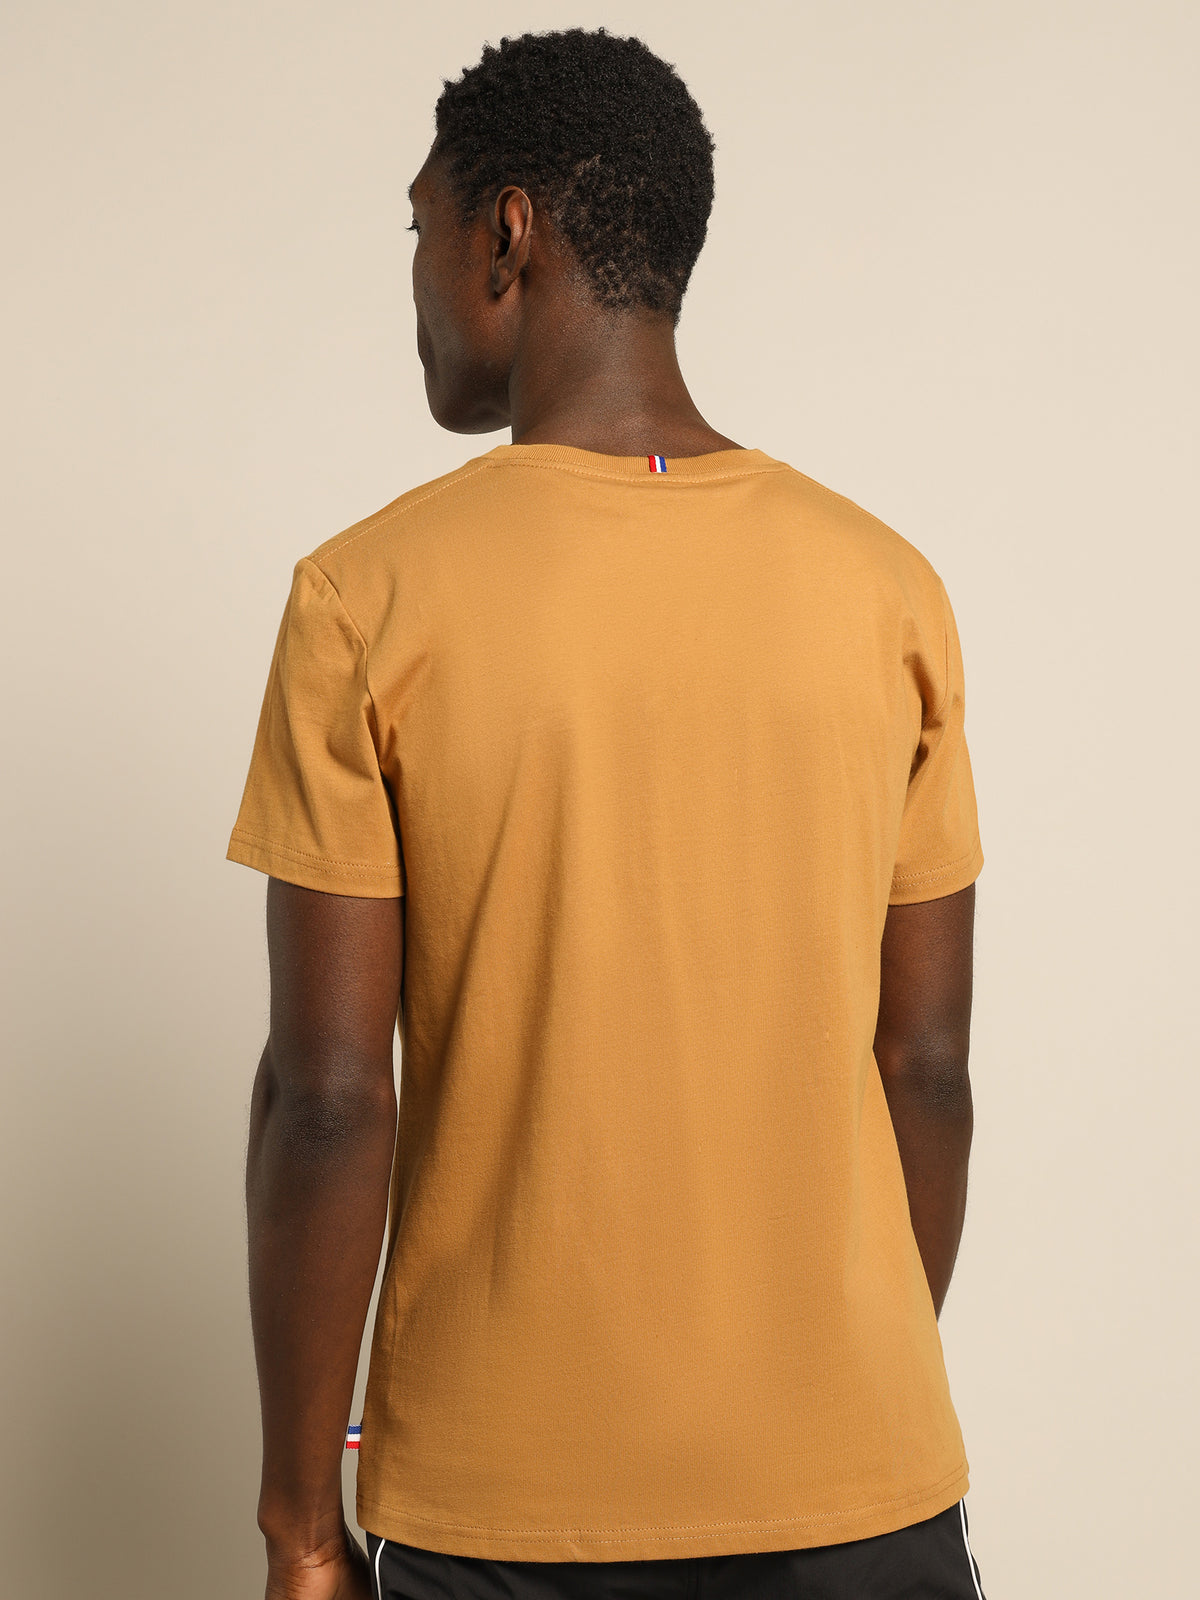 Victor T-Shirt in Persimmon